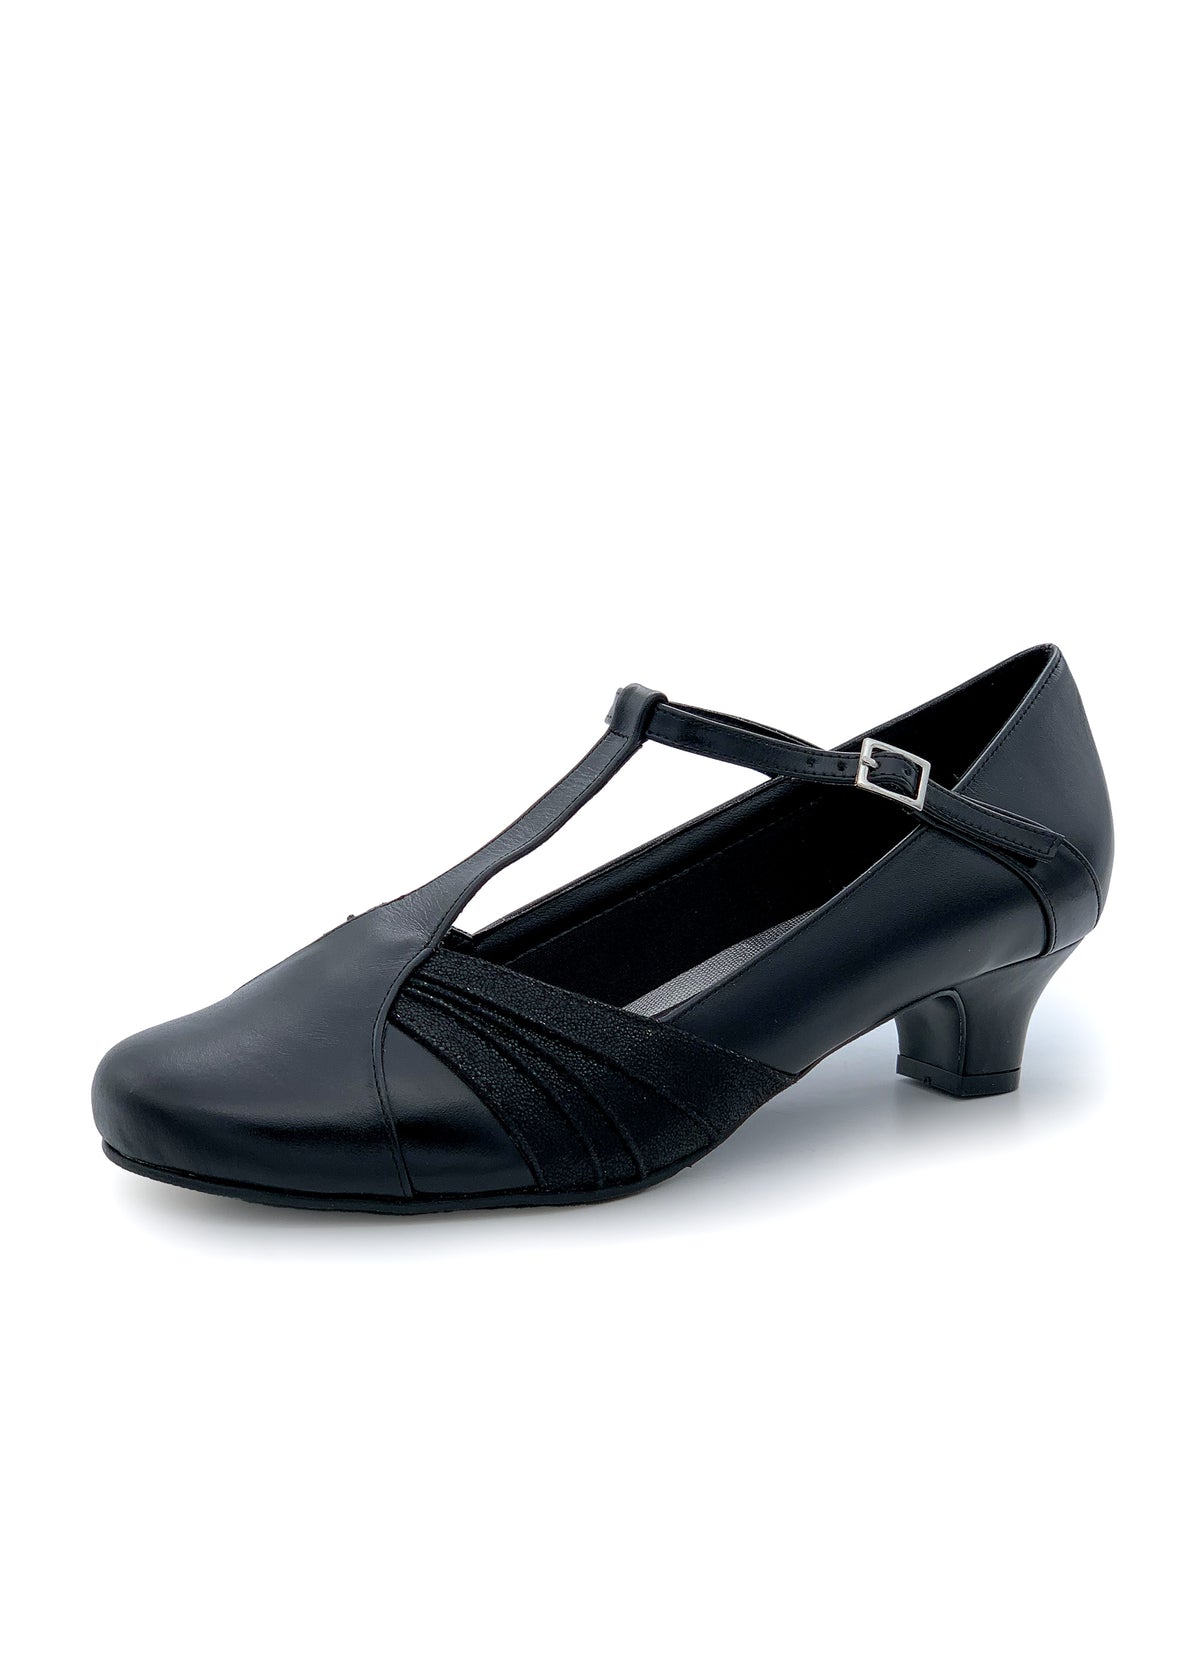 Low open toe shoes with ankle straps - black